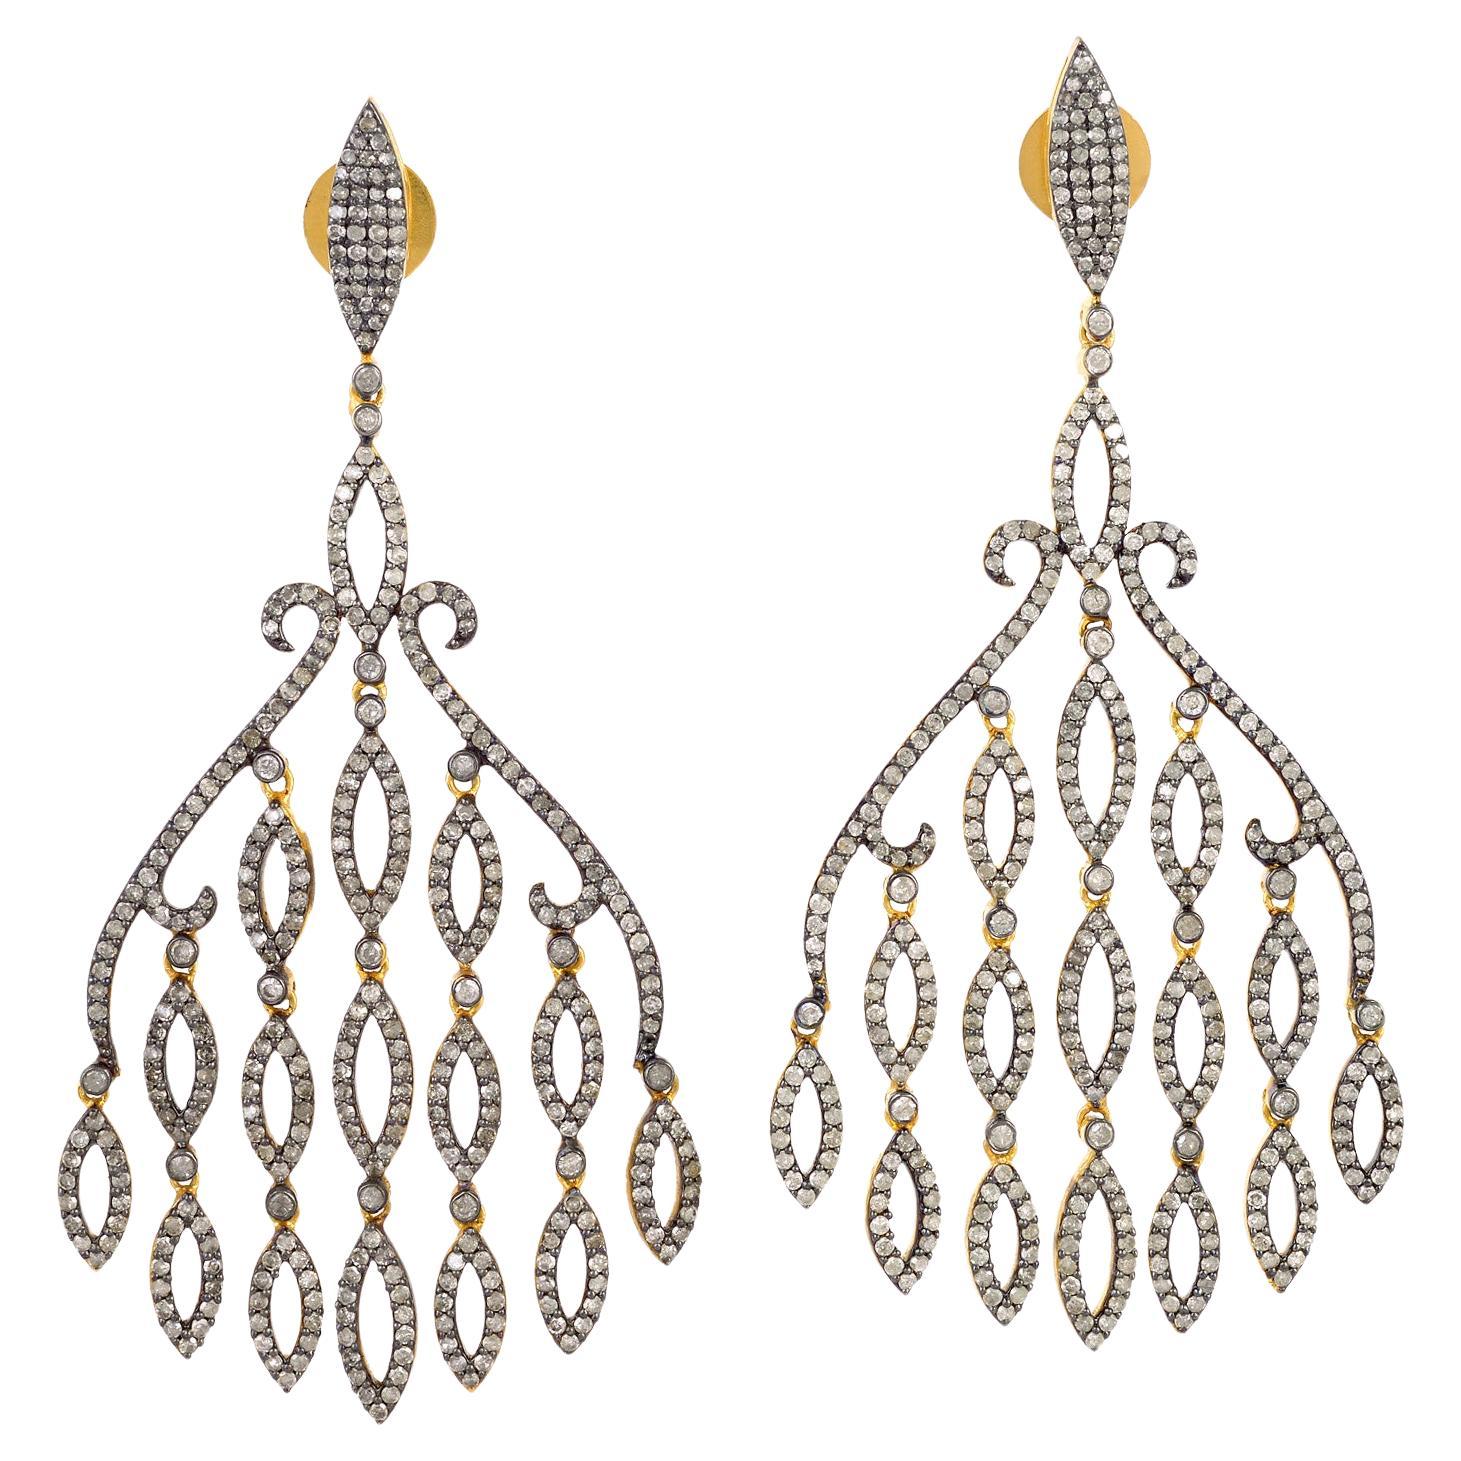 Showering Diamond Chandelier Earrings Made In 18k Yellow Gold & Silver For Sale